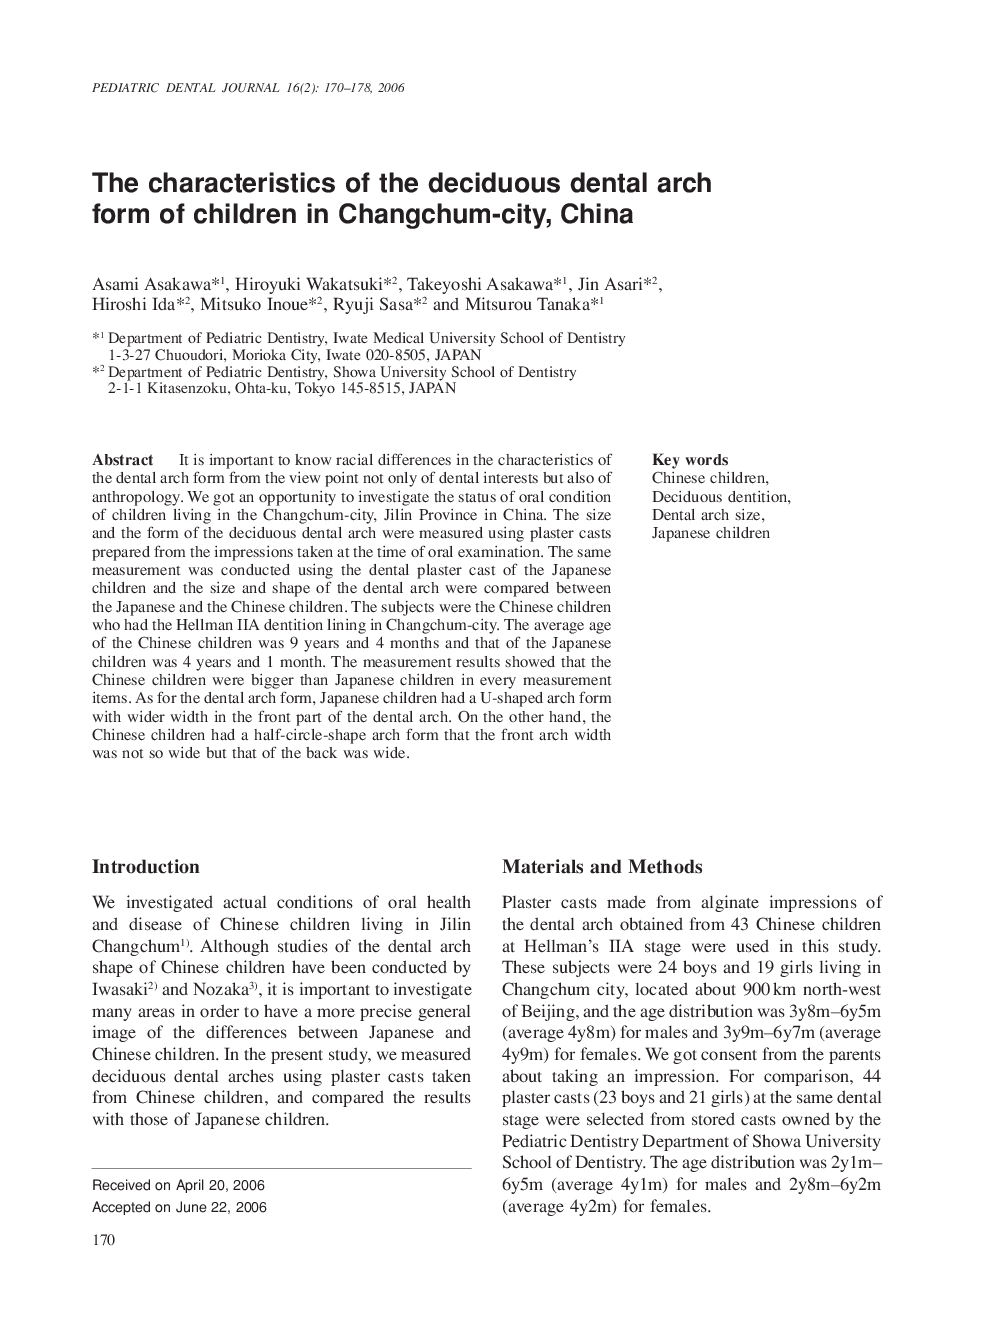 The characteristics of the deciduous dental arch form of children in Changchum-city, China